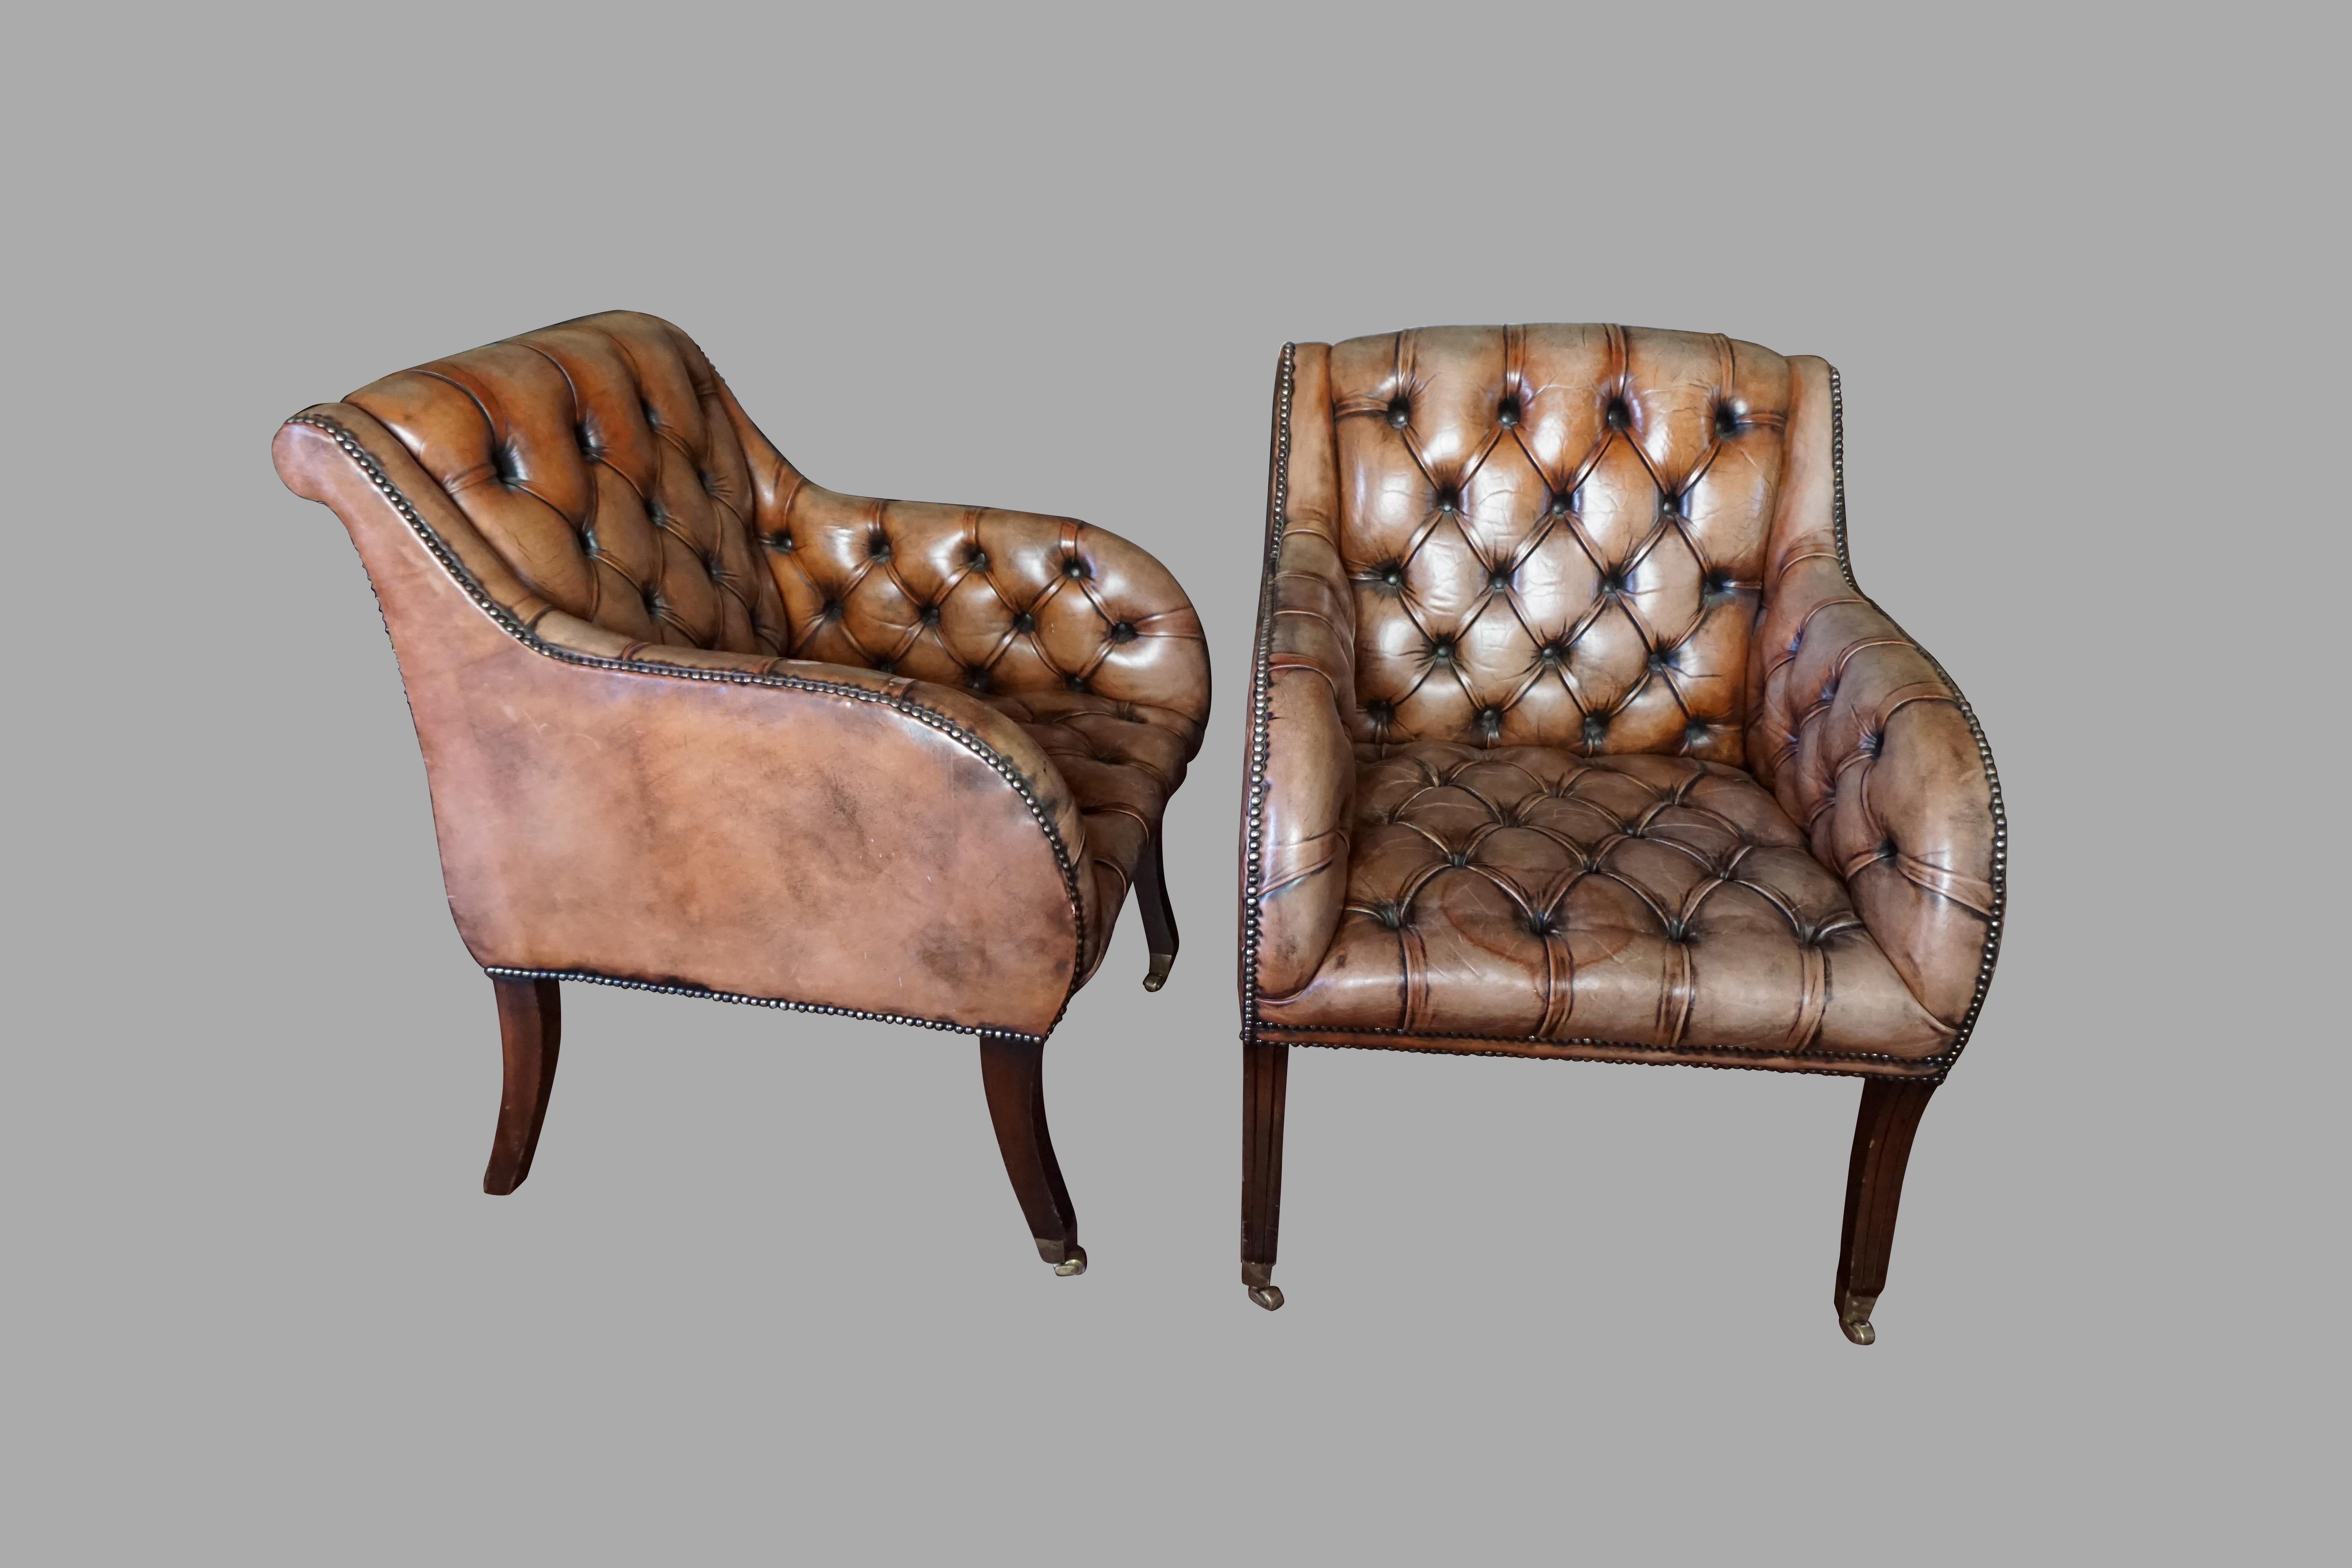 English Pair of Regency Style Tufted Leather Club Chairs with Mahogany Legs